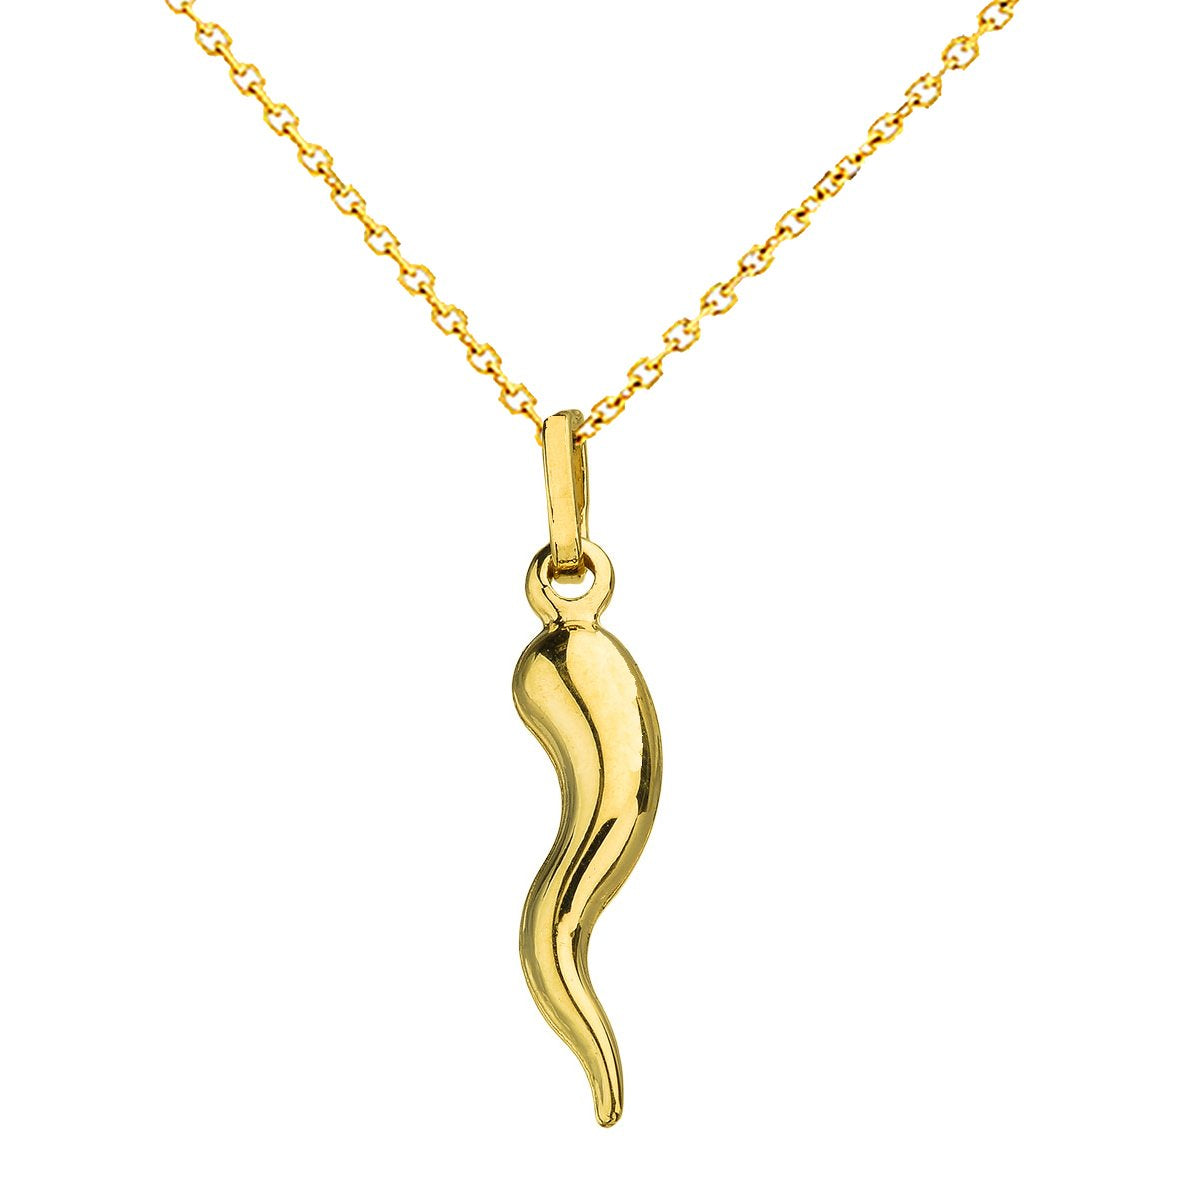 Polished 14k Yellow Gold Simple Cornicello Horn Charm Pendant Necklace